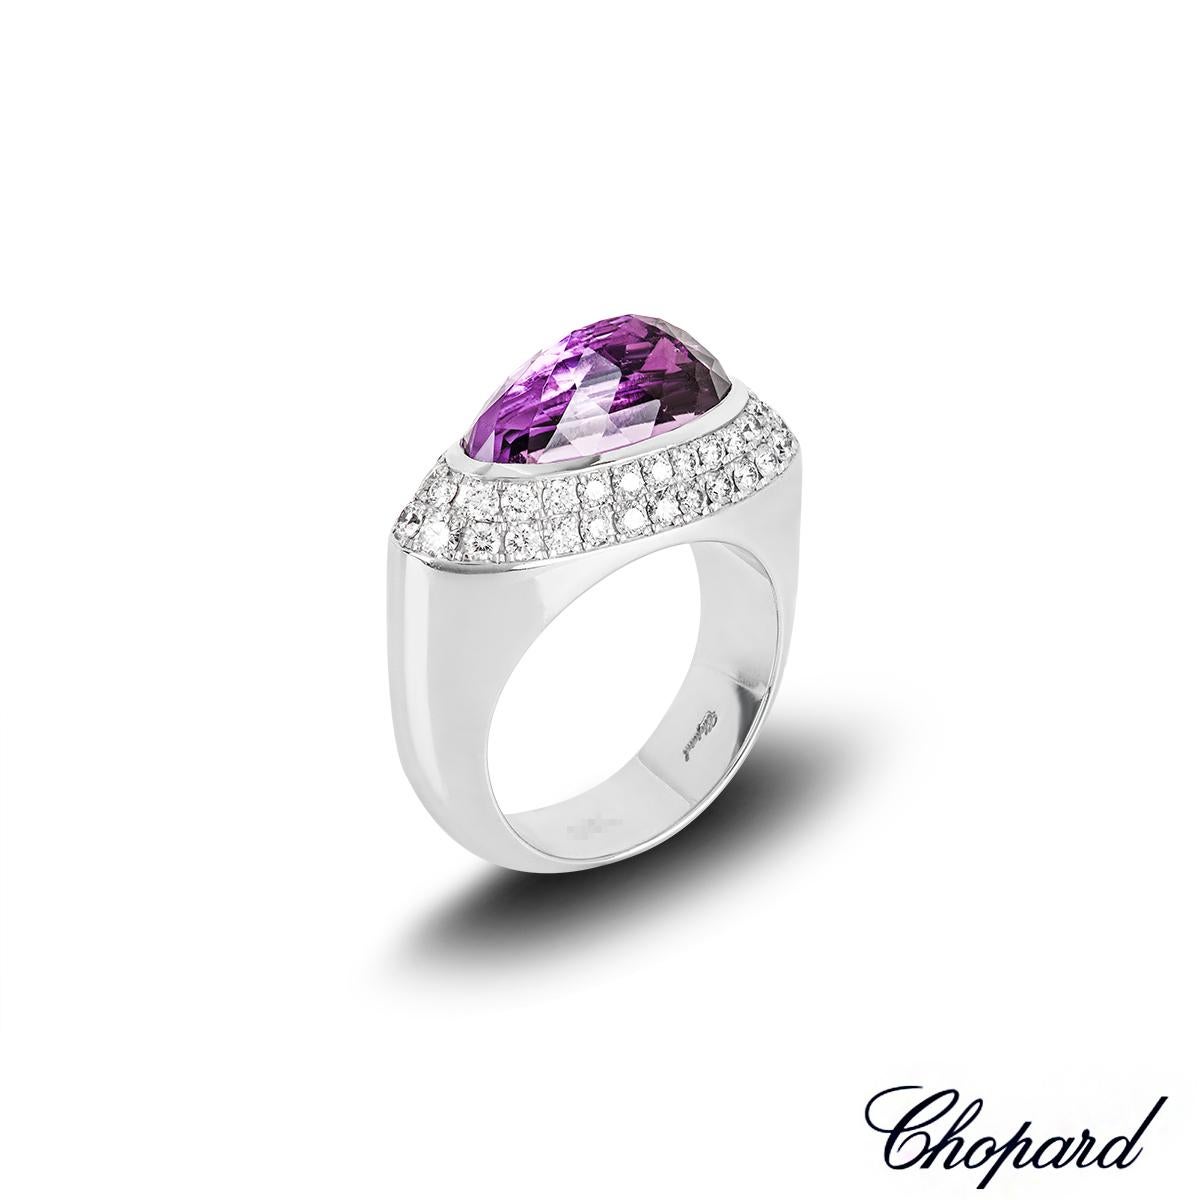 A lovely 18k white gold amethyst and diamond ring by Chopard. The ring features a rose cut amethyst set east-west to the centre in a bezel setting, measuring 15mm in width and 7mm in height. The amethyst is complemented by 50 round brilliant cut